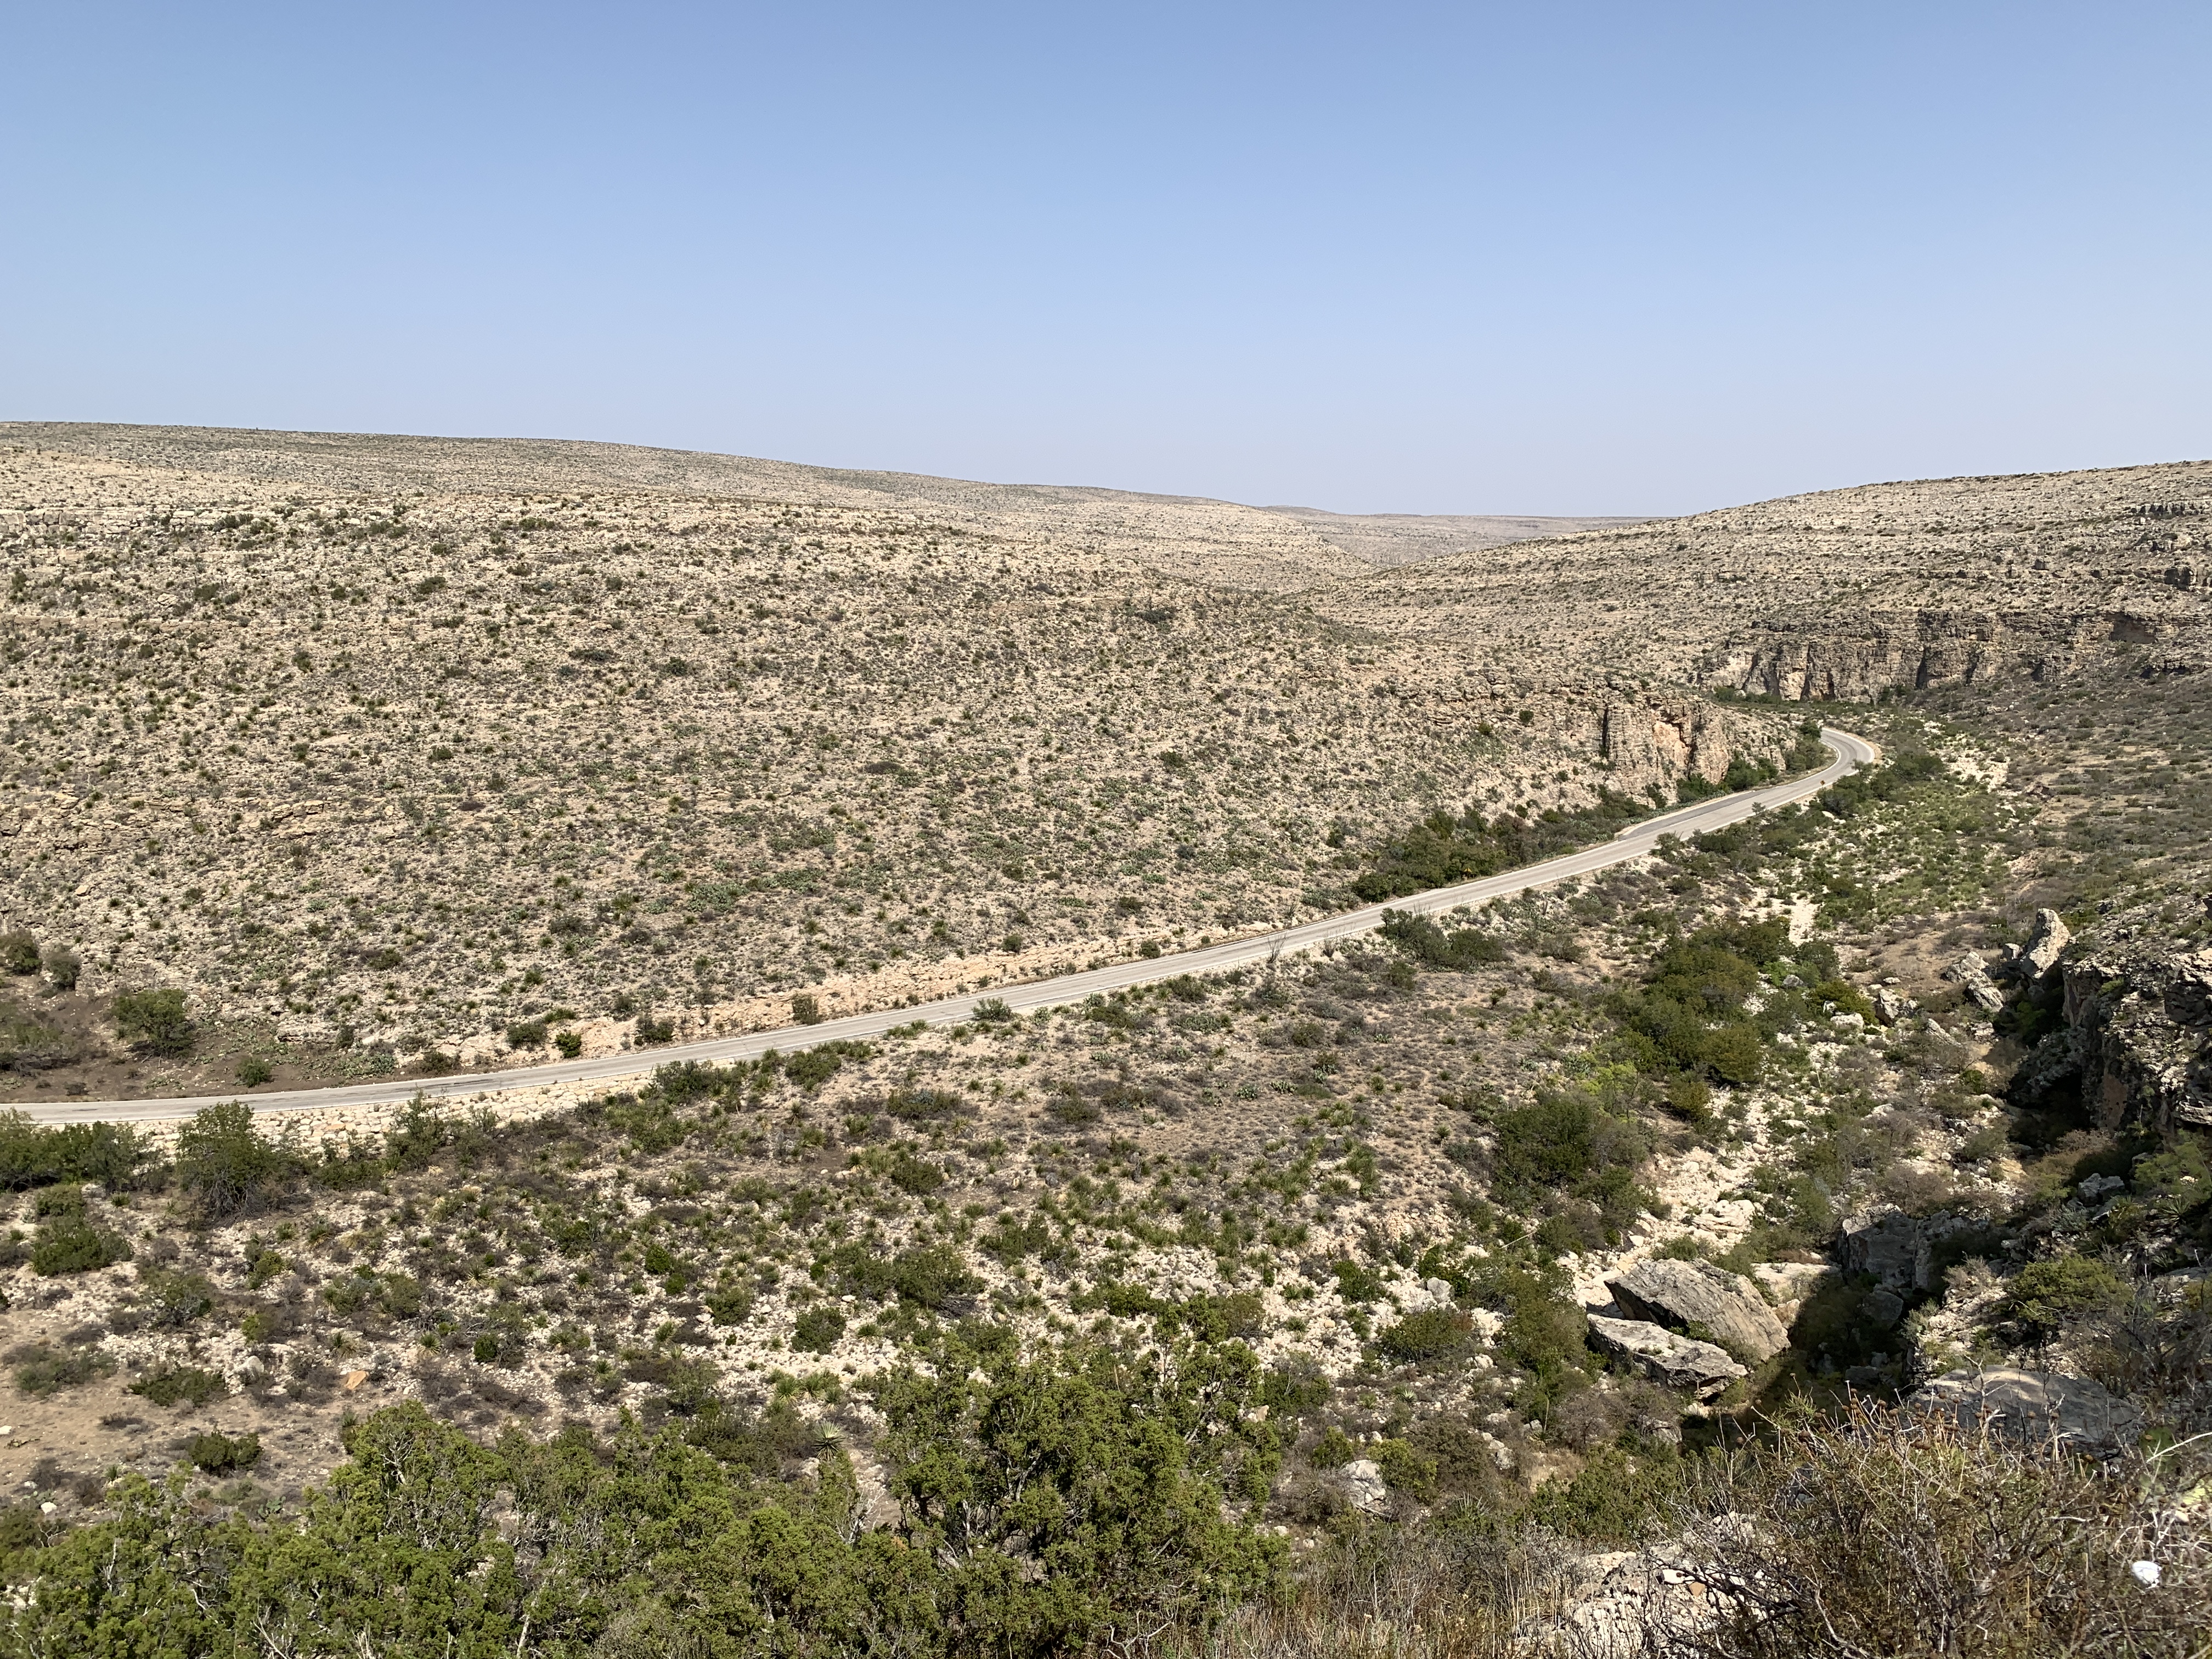 Along the 7 mile switchback drive into Carlsbad Caverns National Park